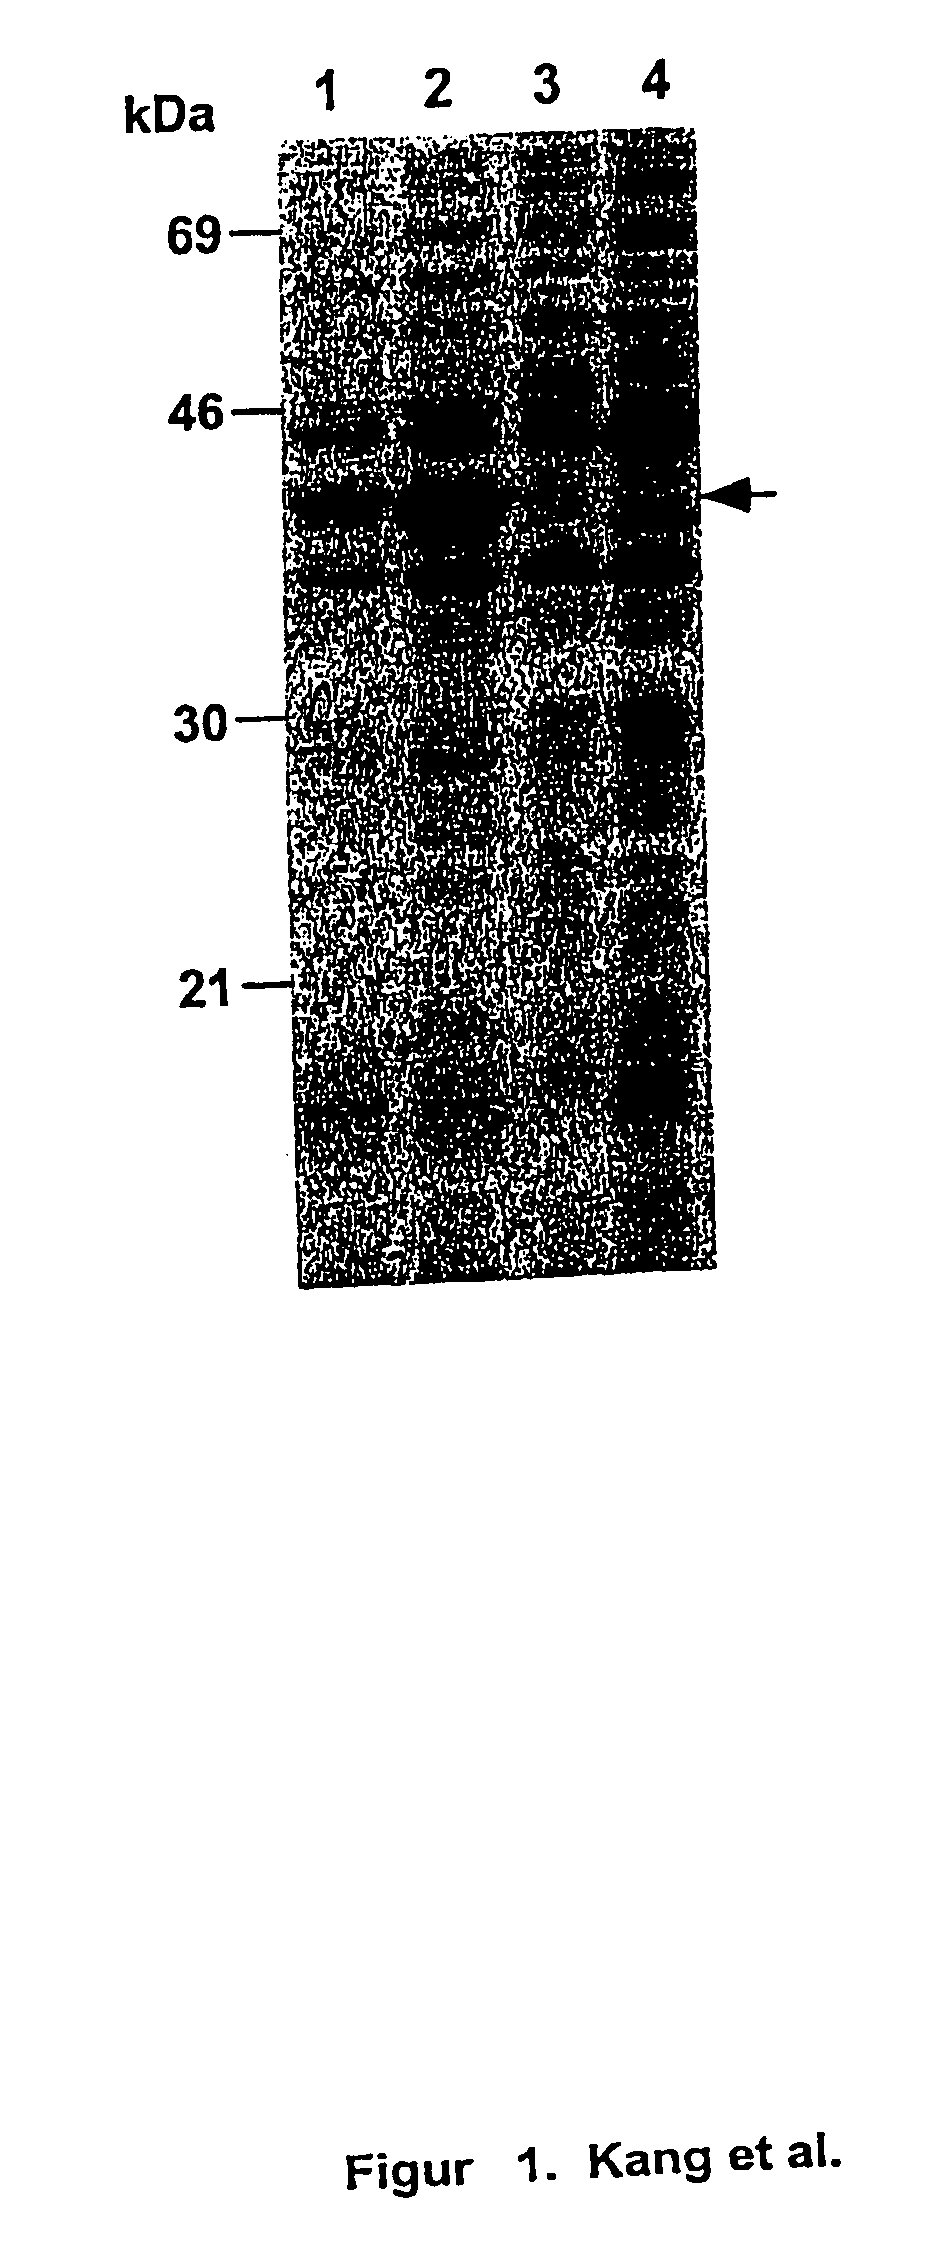 Immunogenic compositions and vaccines comprising carrier bacteria that secrete antigens